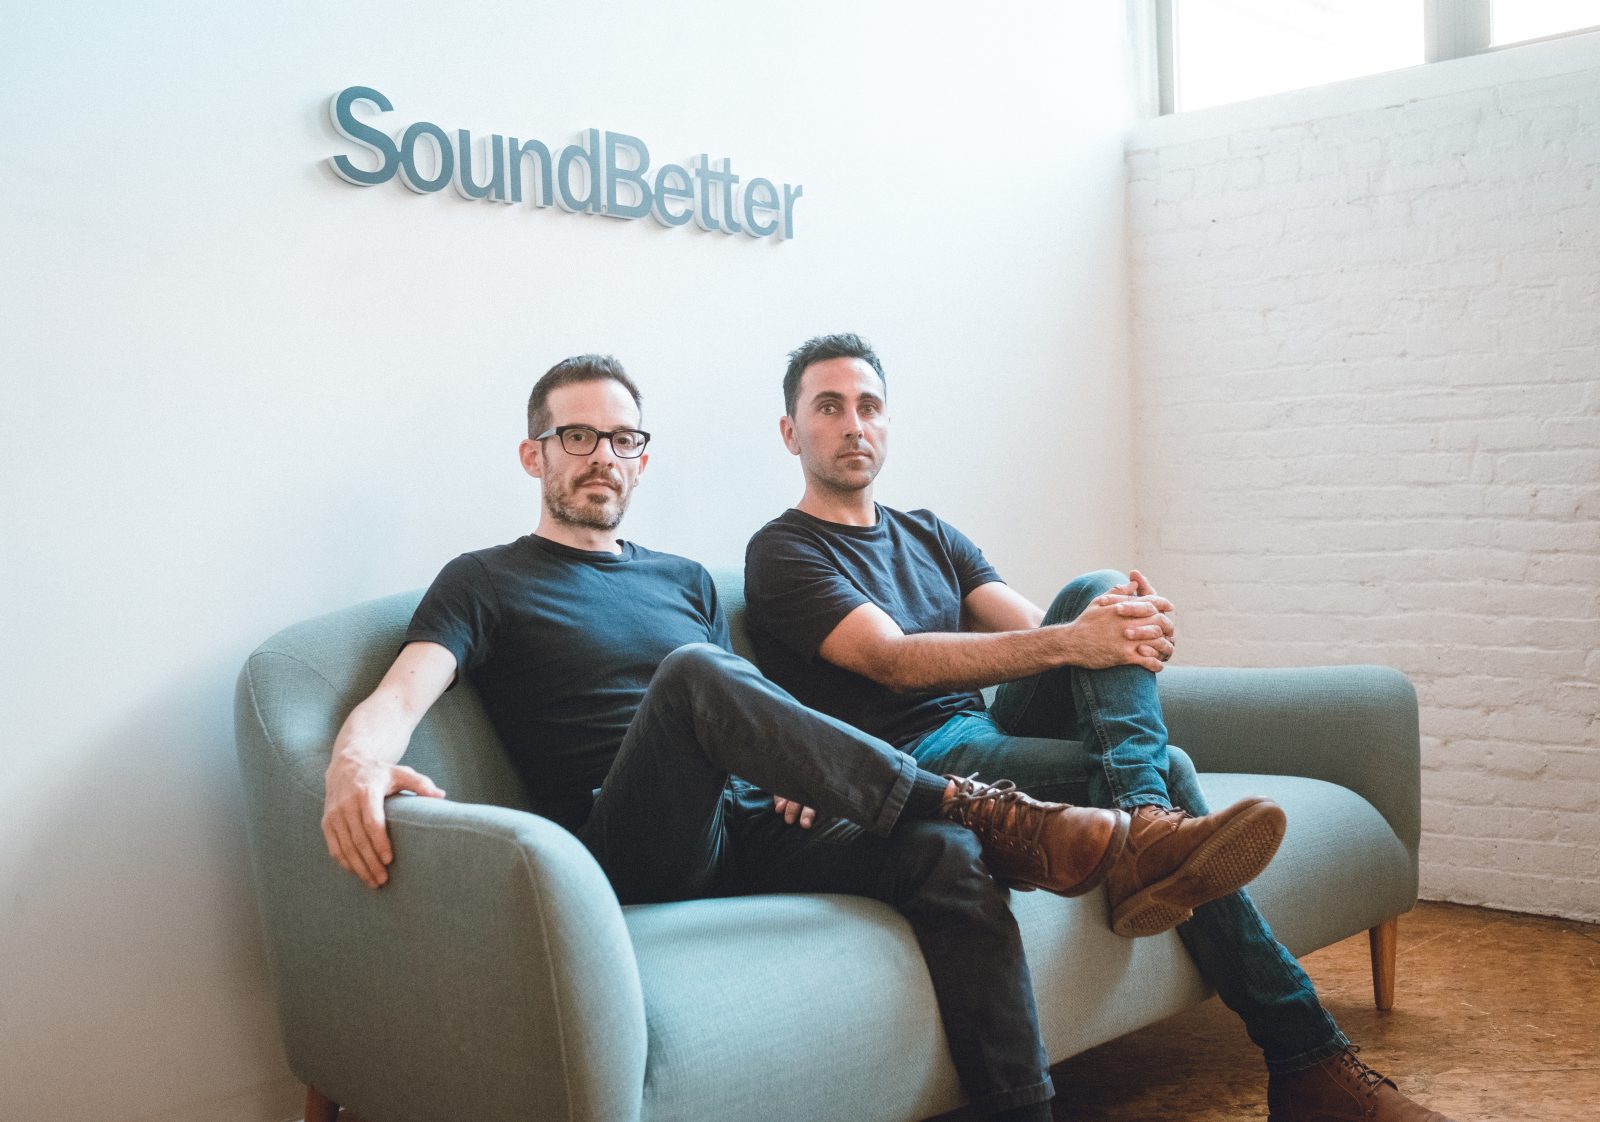 Spotify just bought SoundBetter, a marketplace for music producers